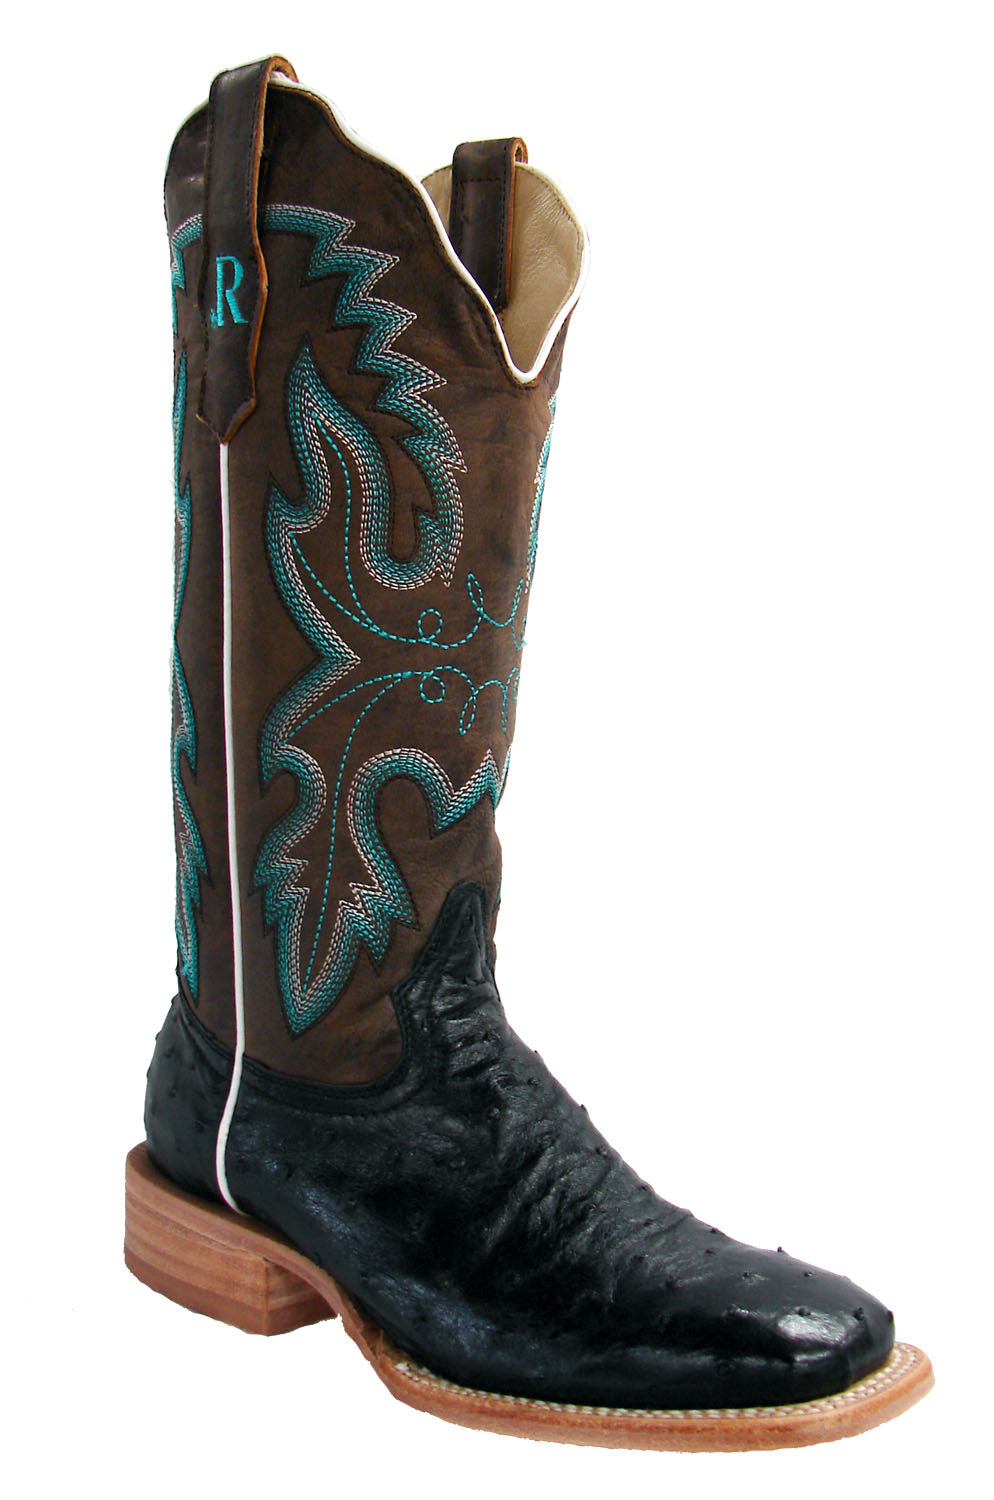 Pard's Western Shop Black Full Quill Ostrich Boots for Women from R. Watson Boots